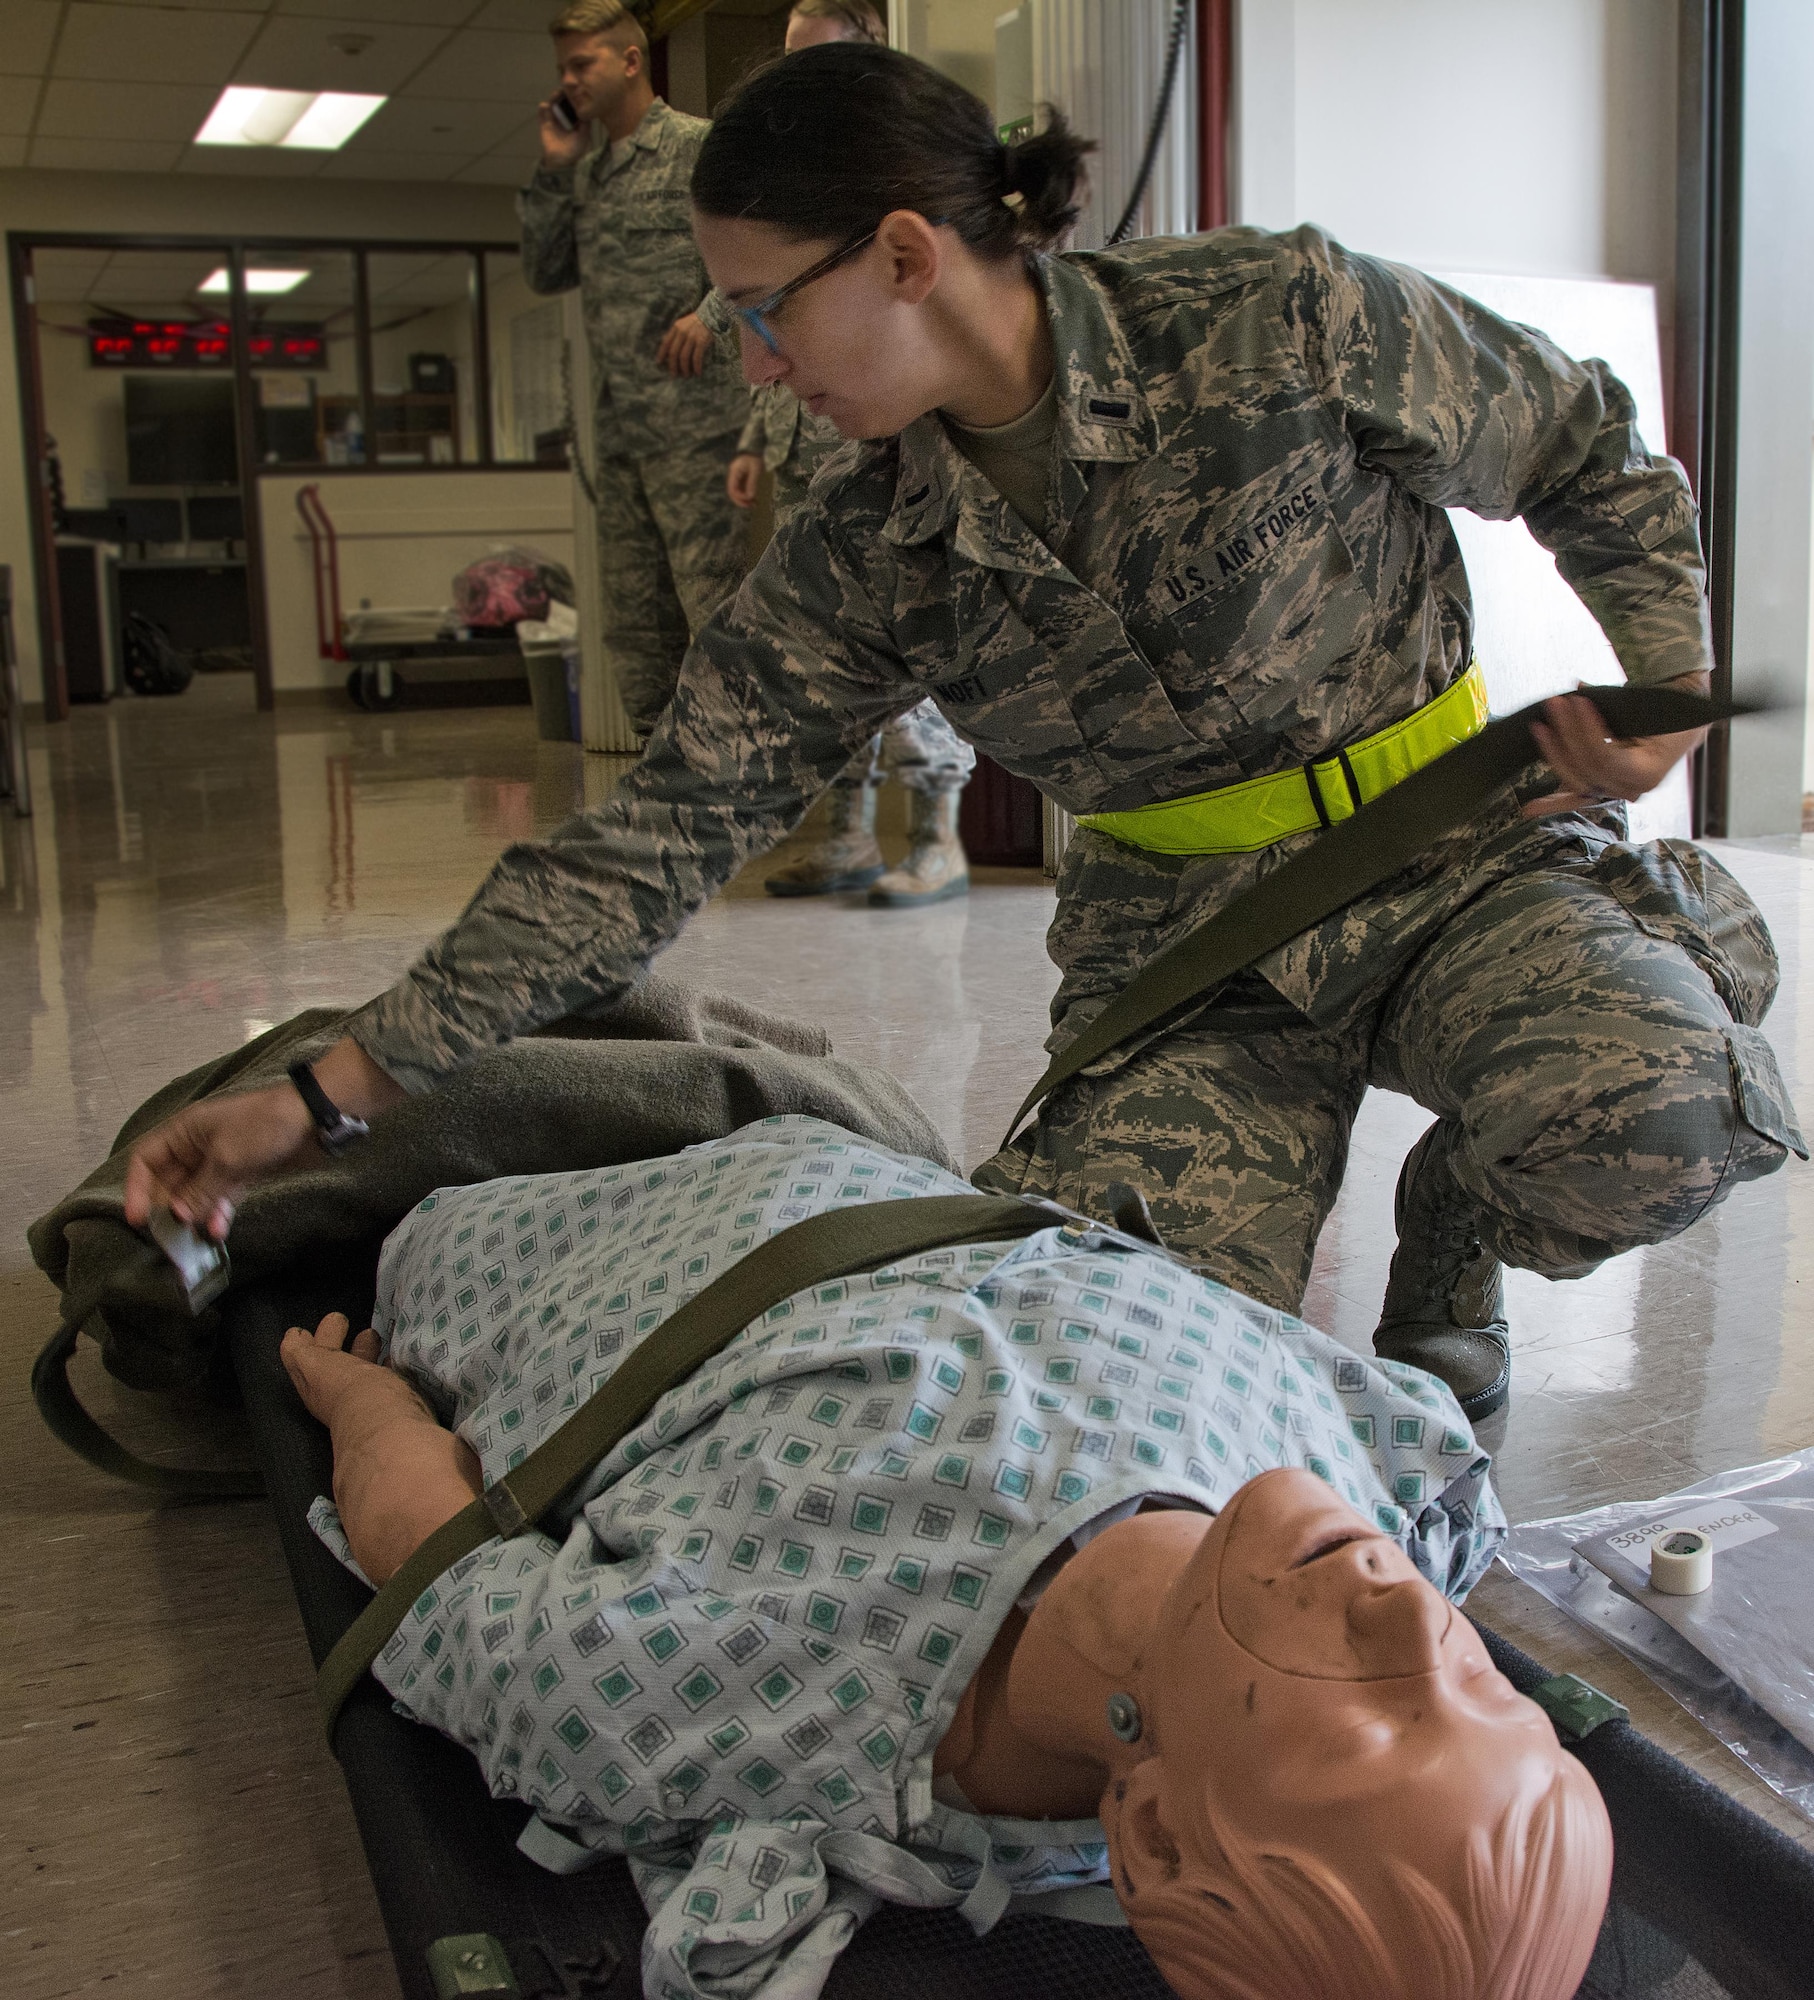 1st Lt. Andrea Nofi, 60th Inpatient Squadron nurse, stages a medical manikin at David Grant U.S. Air Force Medical Center at Travis Air Force Base, Calif., on March 24, 2017. Members of the 60th IPTS participated in the Air Force Reserve exercise Patriot Delta, providing enroute patient care and staging the medical manikins. (U.S. Air Force photo by Staff Sgt. Daniel Phelps)